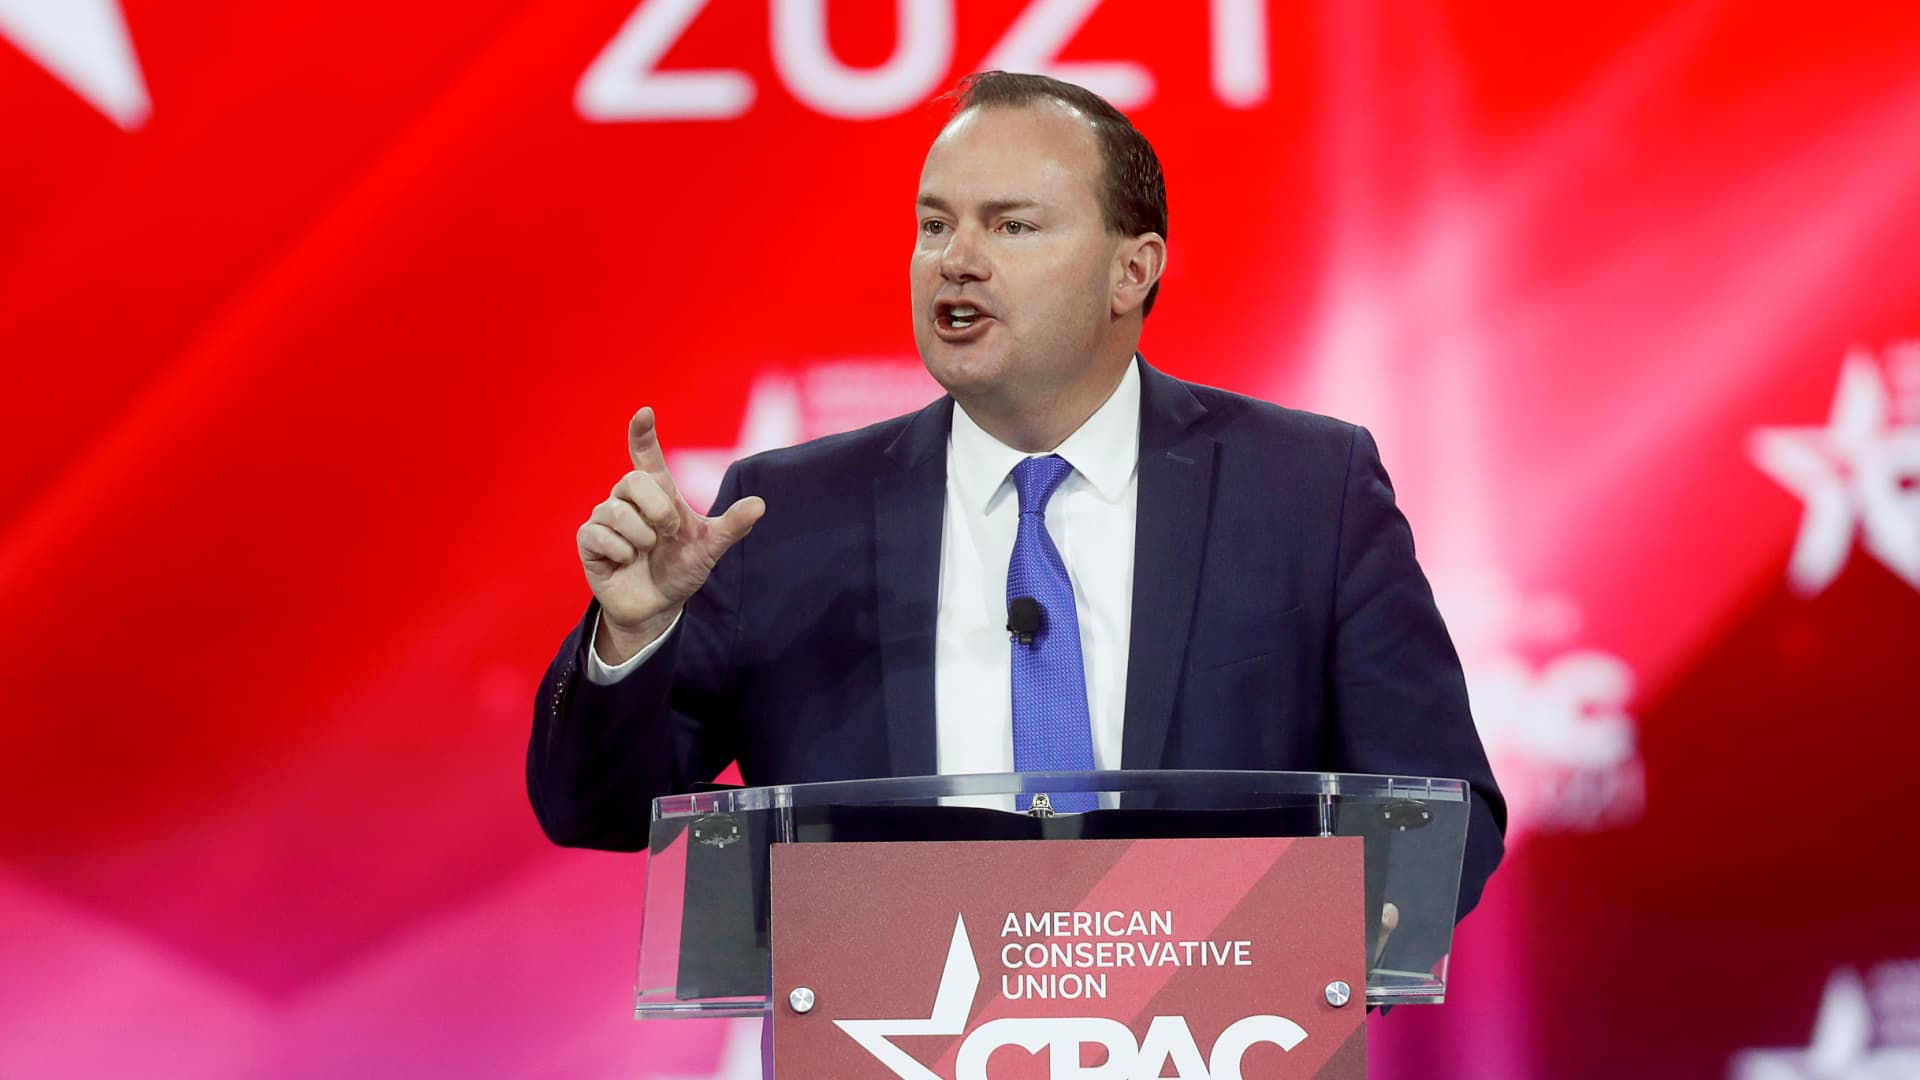 Sen. Mike Lee of Utah speaks at the Conservative Political Action Conference (CPAC) in Orlando, Florida, February 26, 2021.